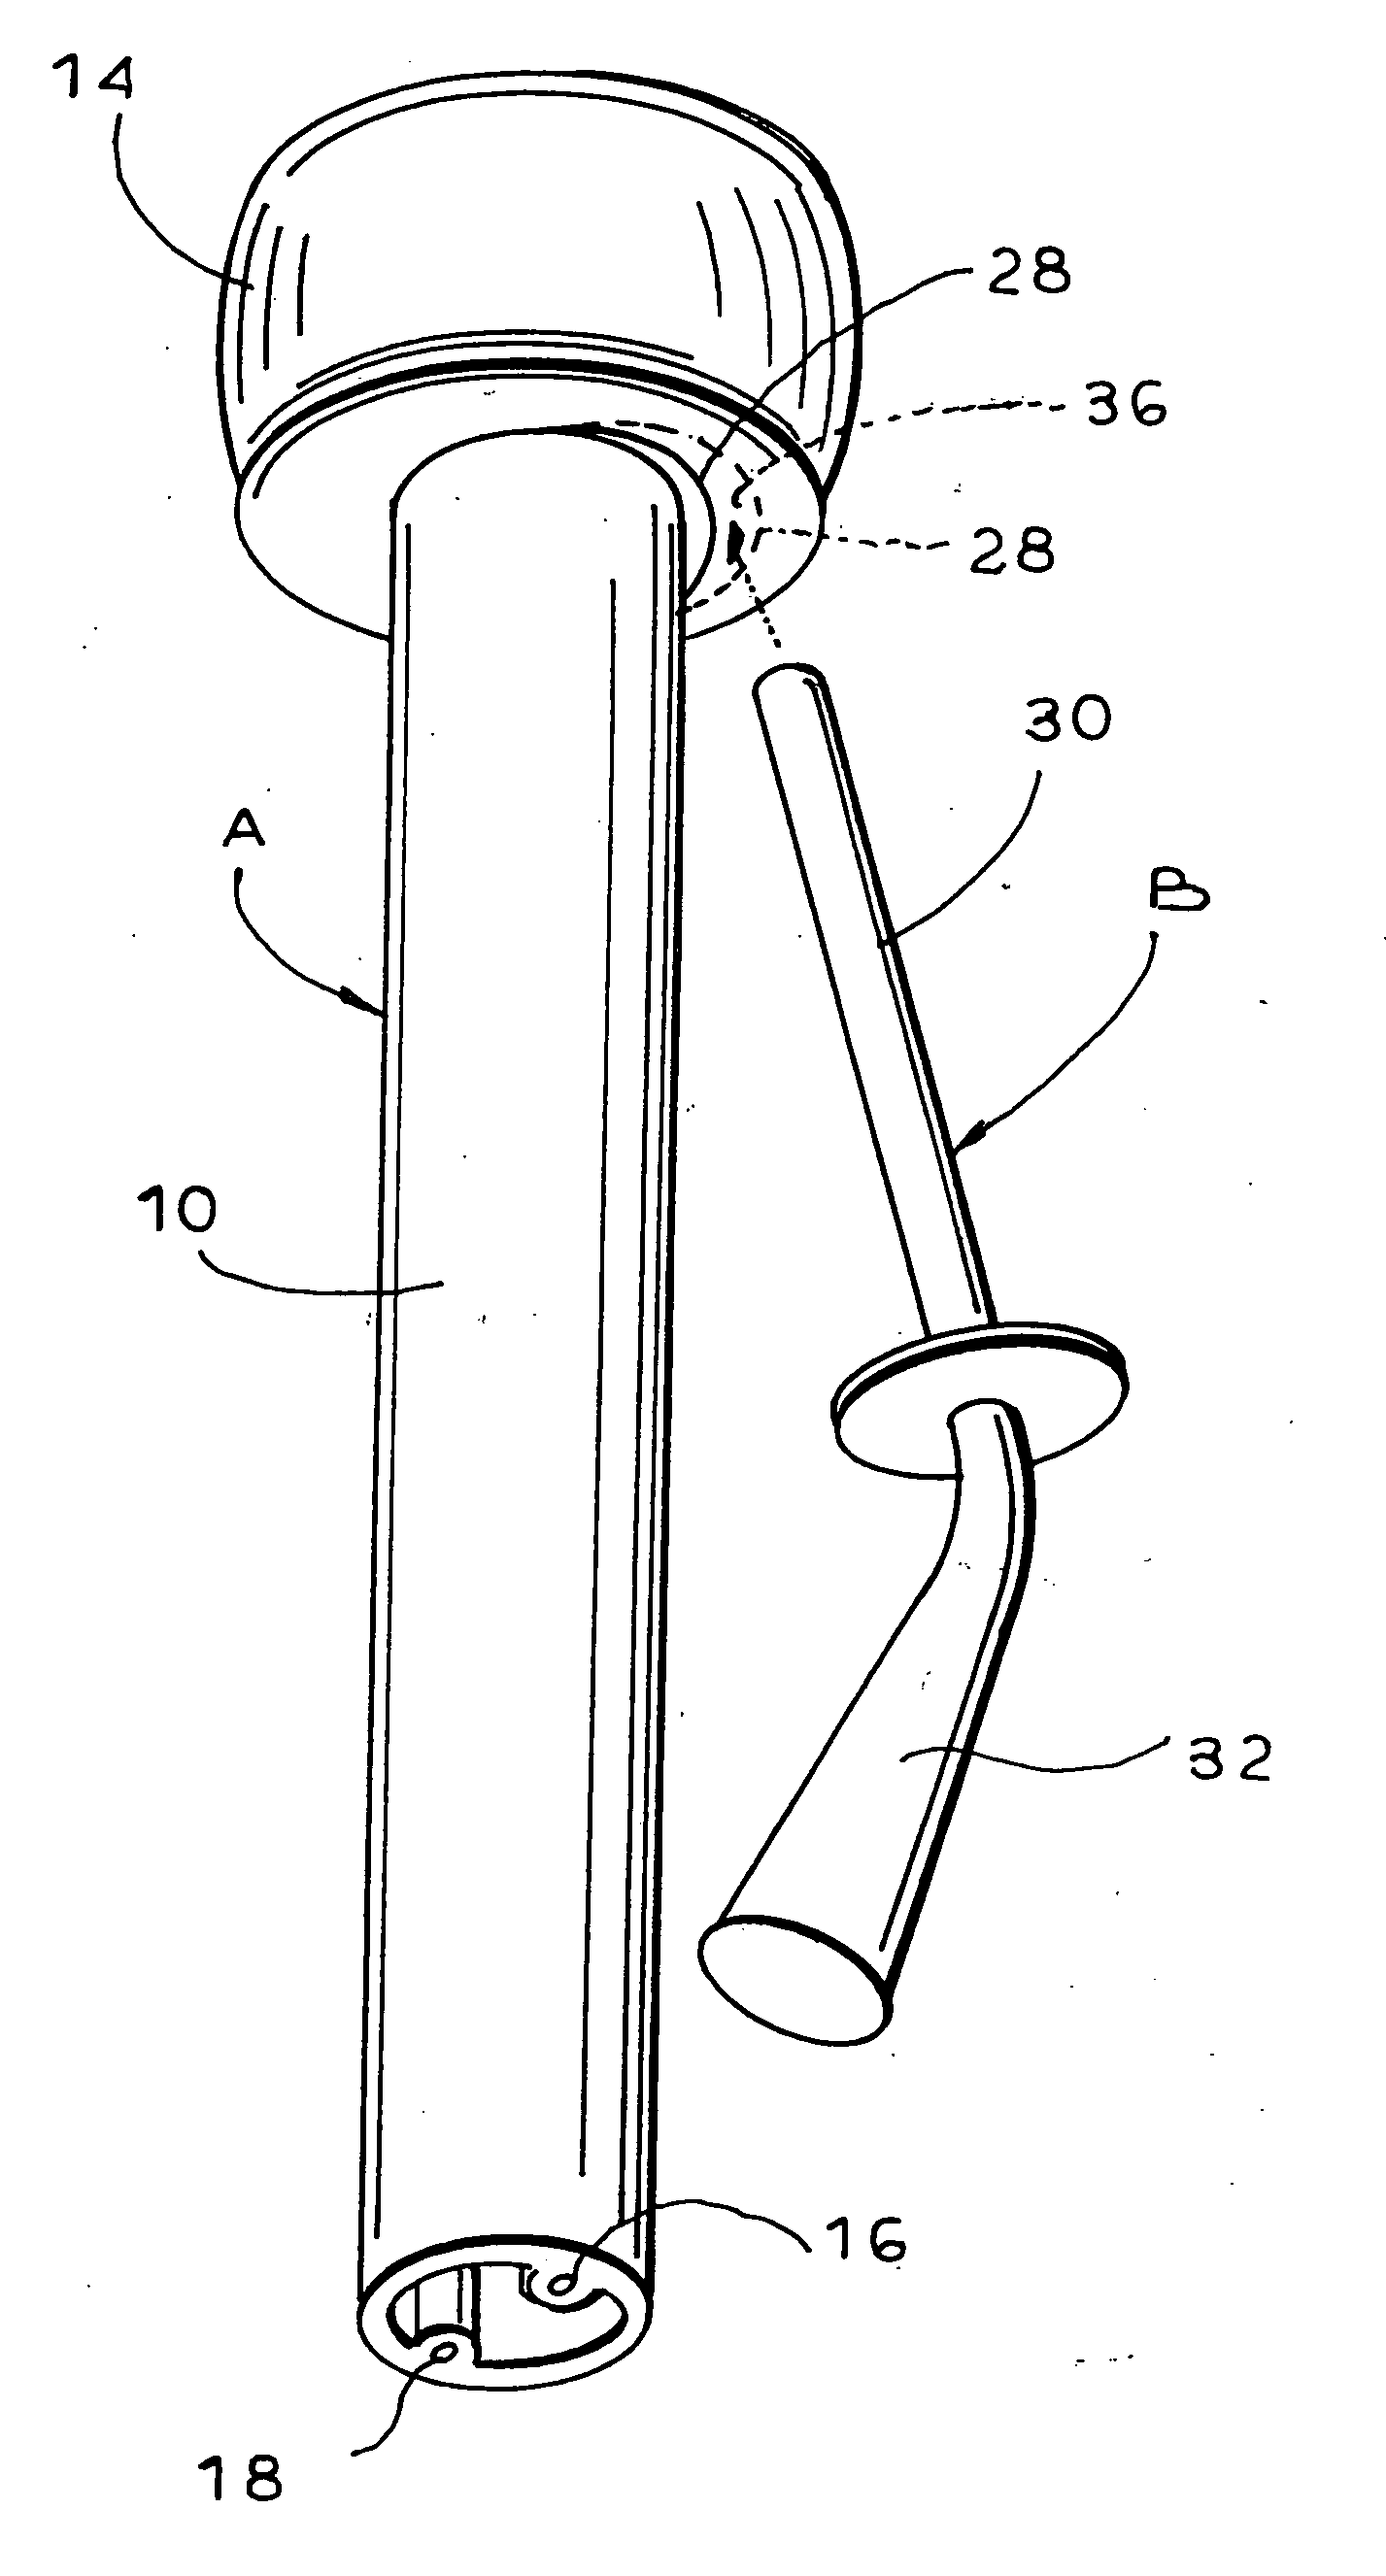 Balloon catheter with positioning pocket